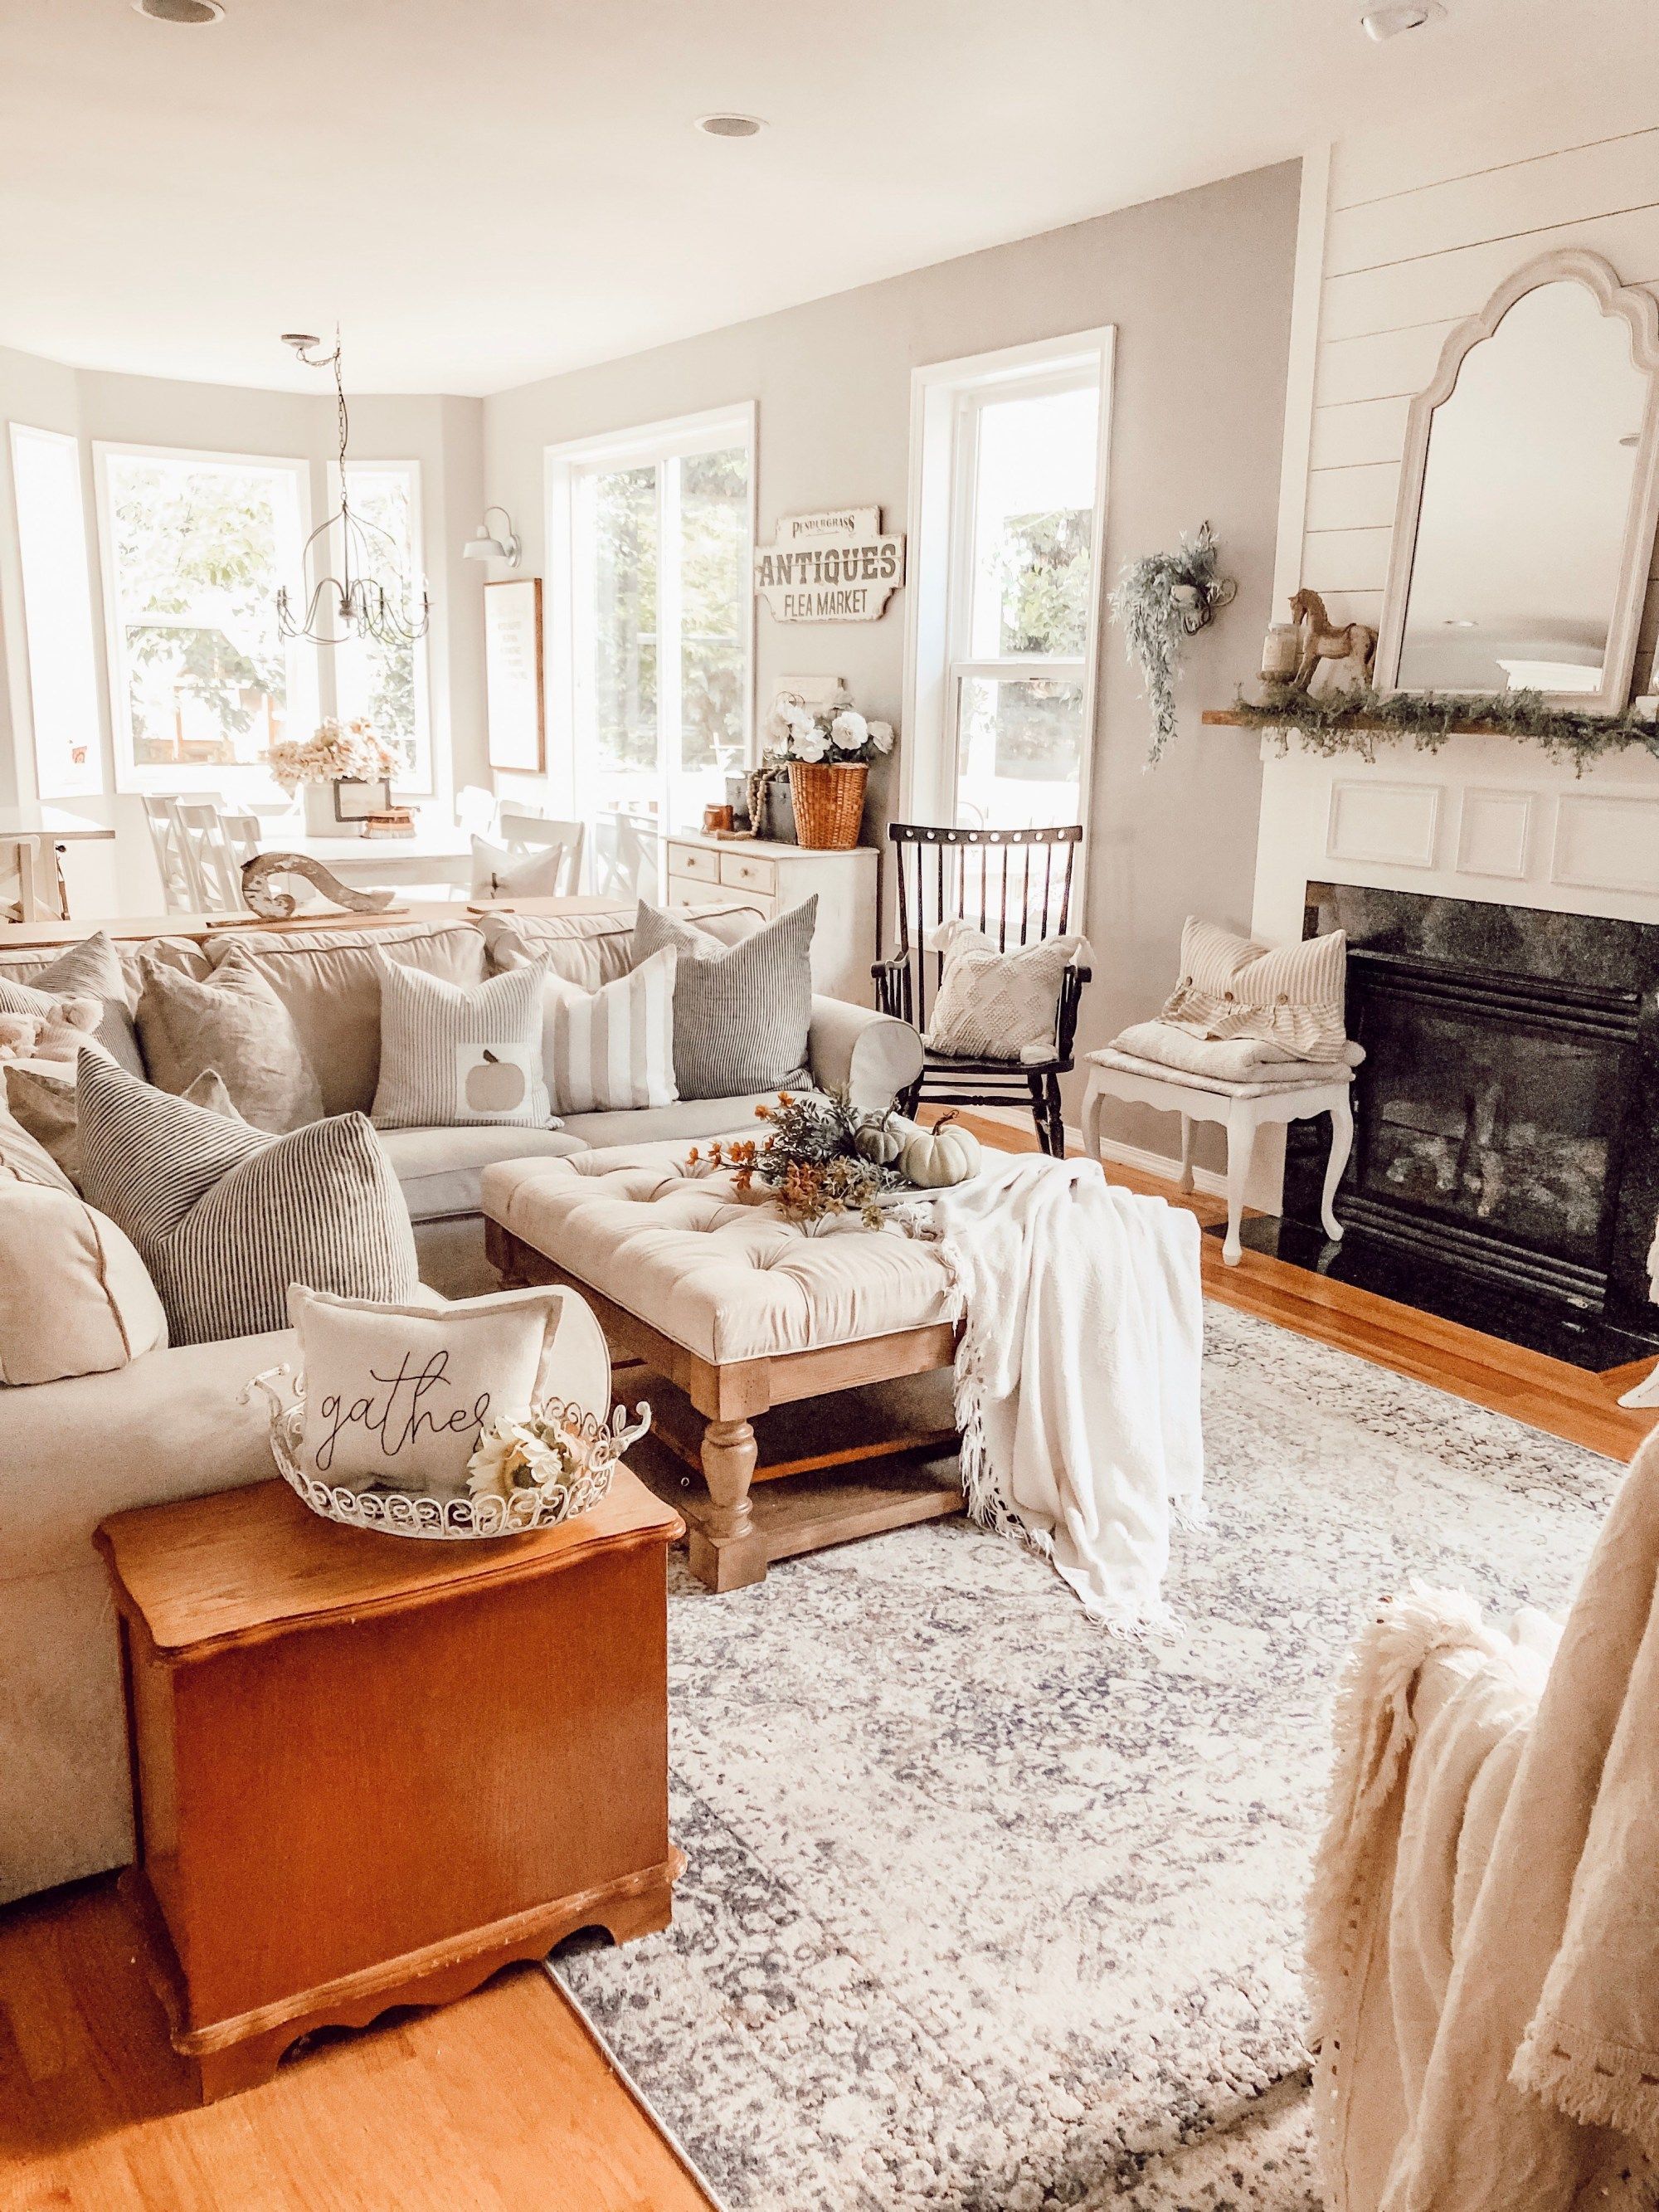 Rustic Farmhouse Interior Design: 10 Must Have Elements For A Cozy Home